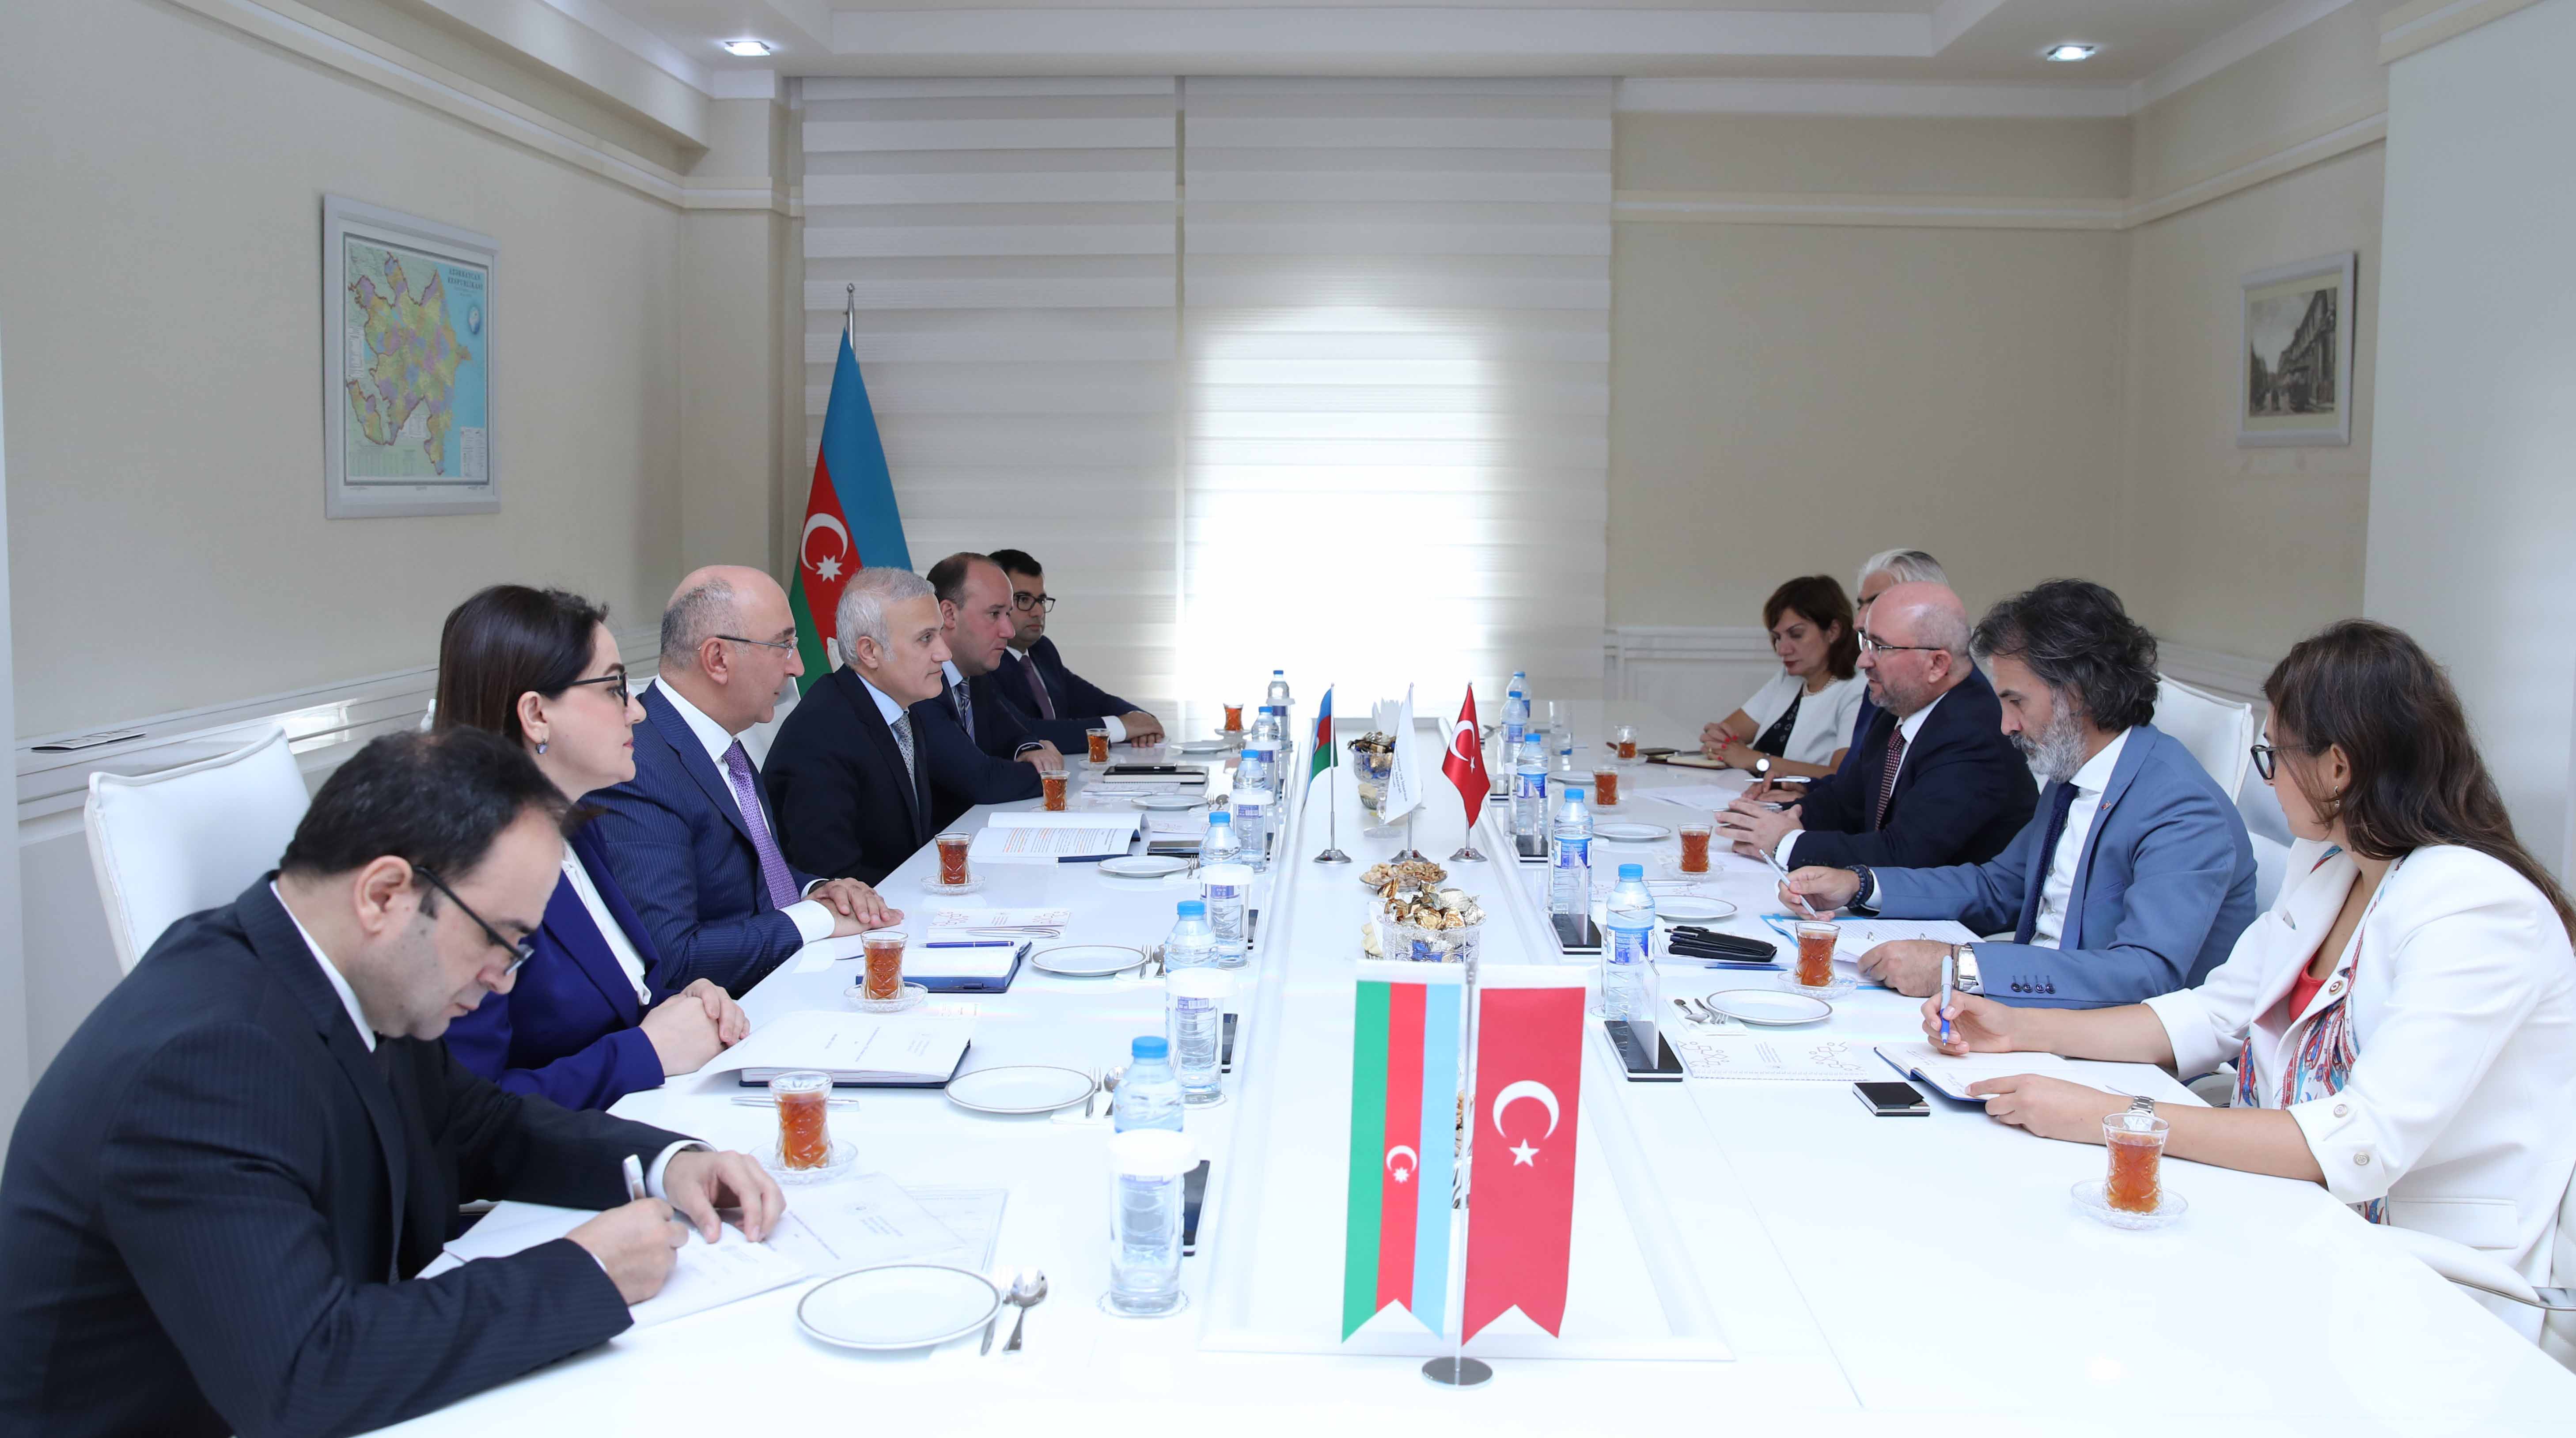 Meeting with the representatives of the Turkish Standards Institution